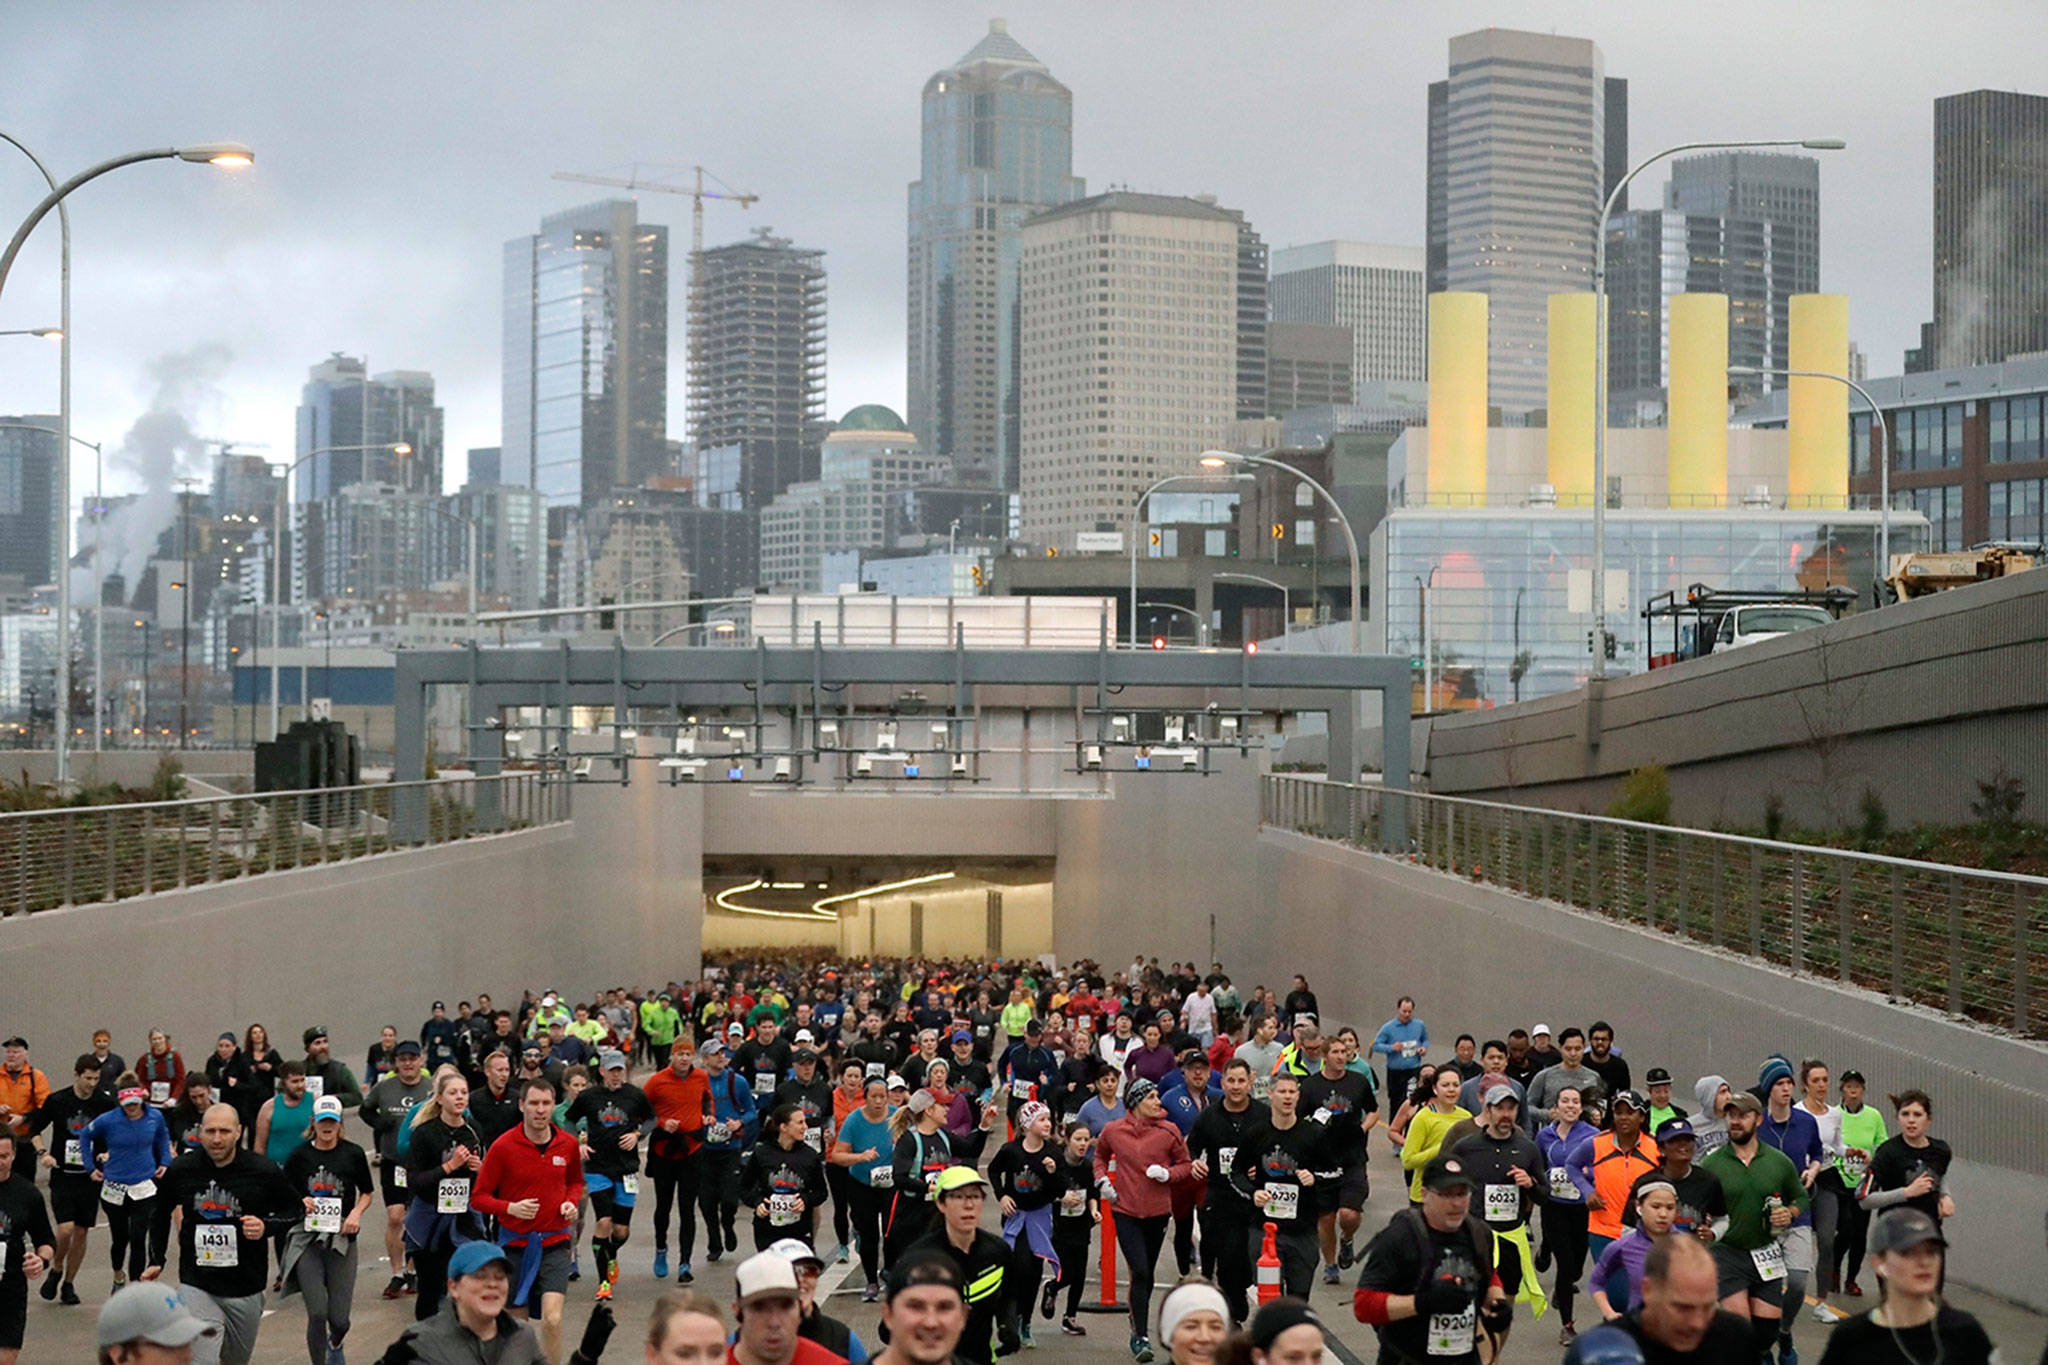 Thousands of runners emerge Saturday from the new tunnel that will replace the Alaskan Way Viaduct in downtown Seattle as they take part in an 8k run to mark the planned Monday grand opening of the tunnel. (AP Photo/Ted S. Warren)